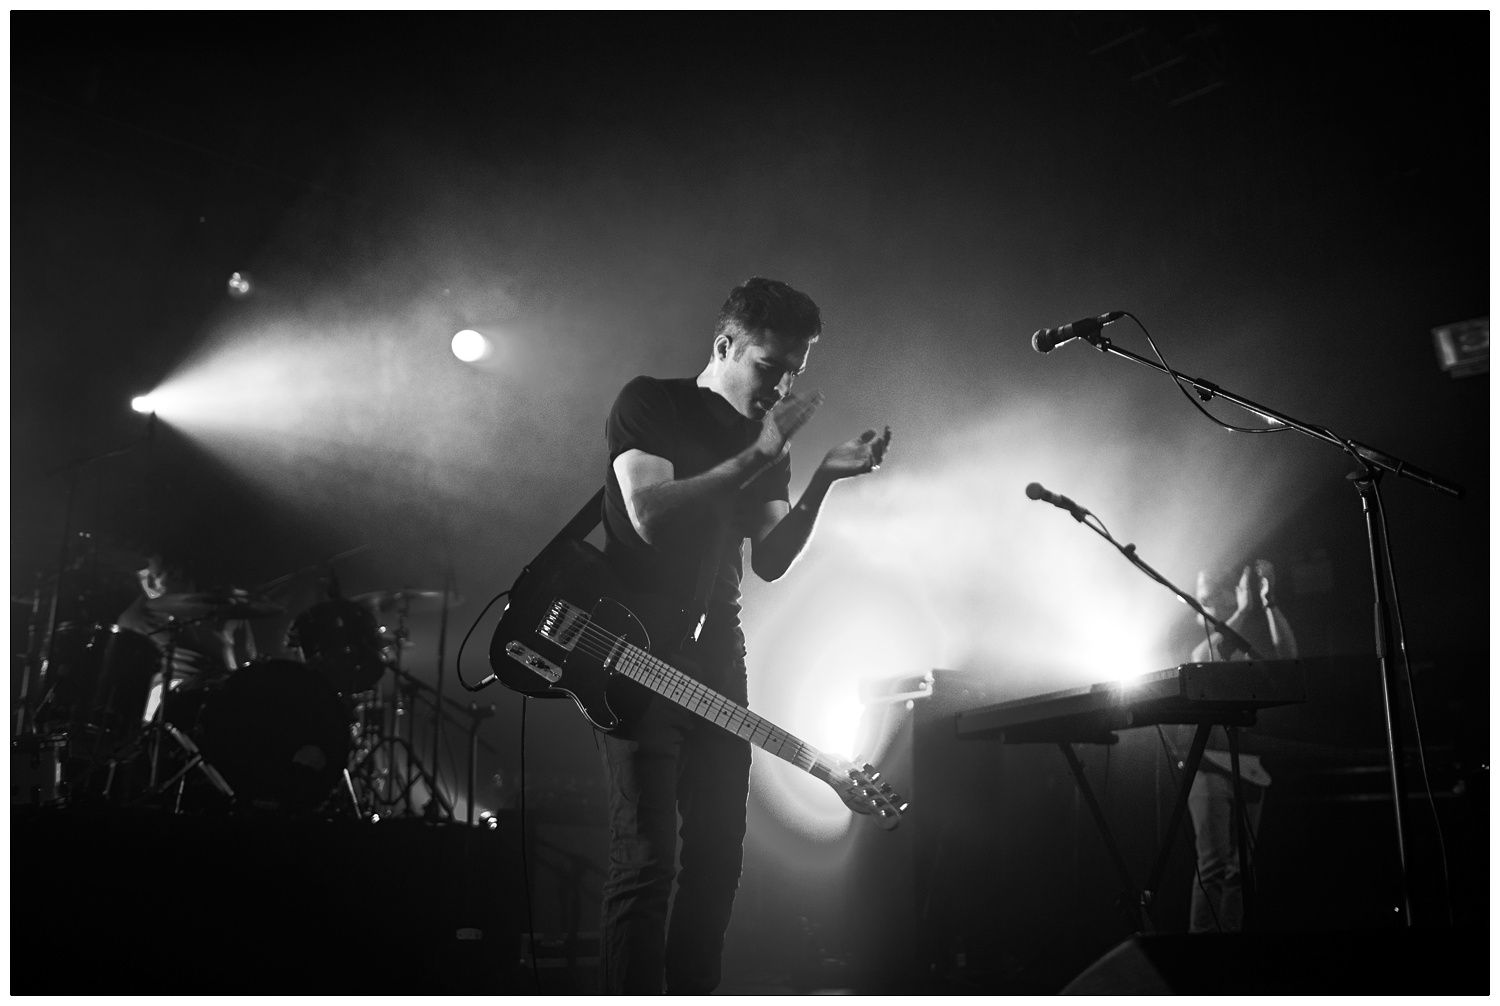 Black and white photograph of Nathan Nicholson clapping at The Boxer Rebellion gig at The Forum in 2013